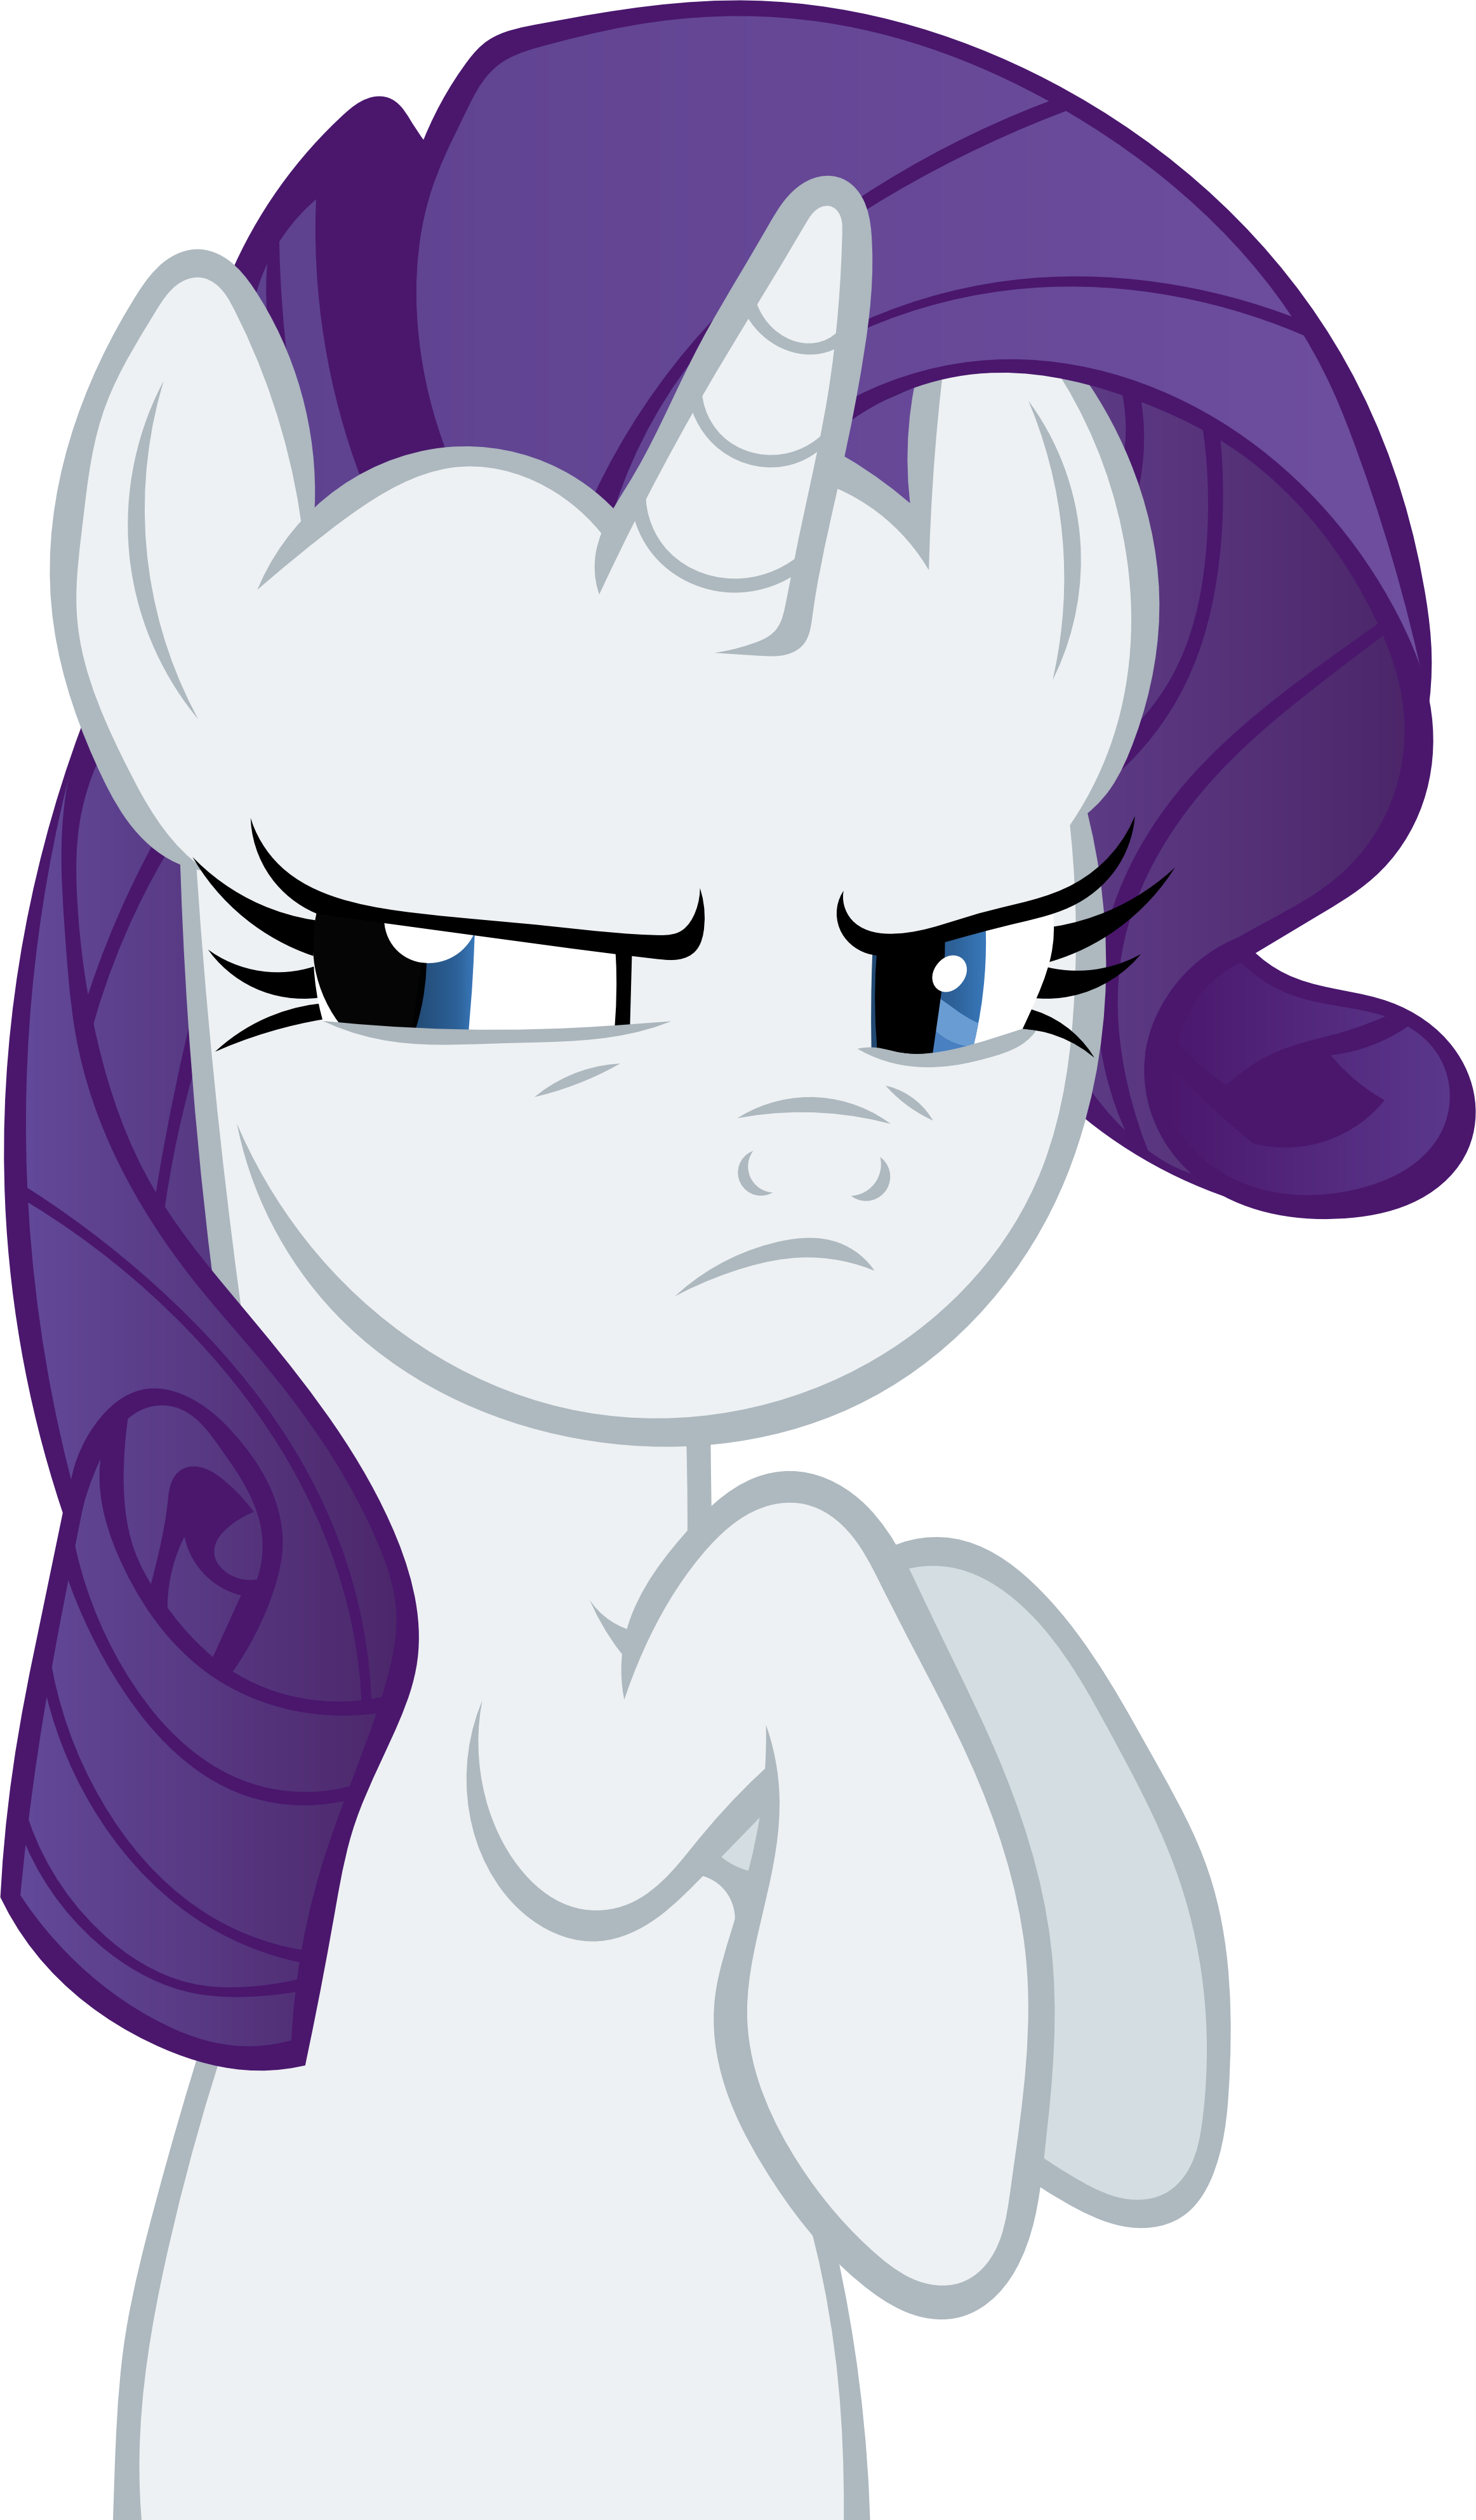 1470661__safe_artist-colon-blindcavesalamander_rarity_look+before+you+sleep_pony_simple+background_solo_transparent+background_vector.png